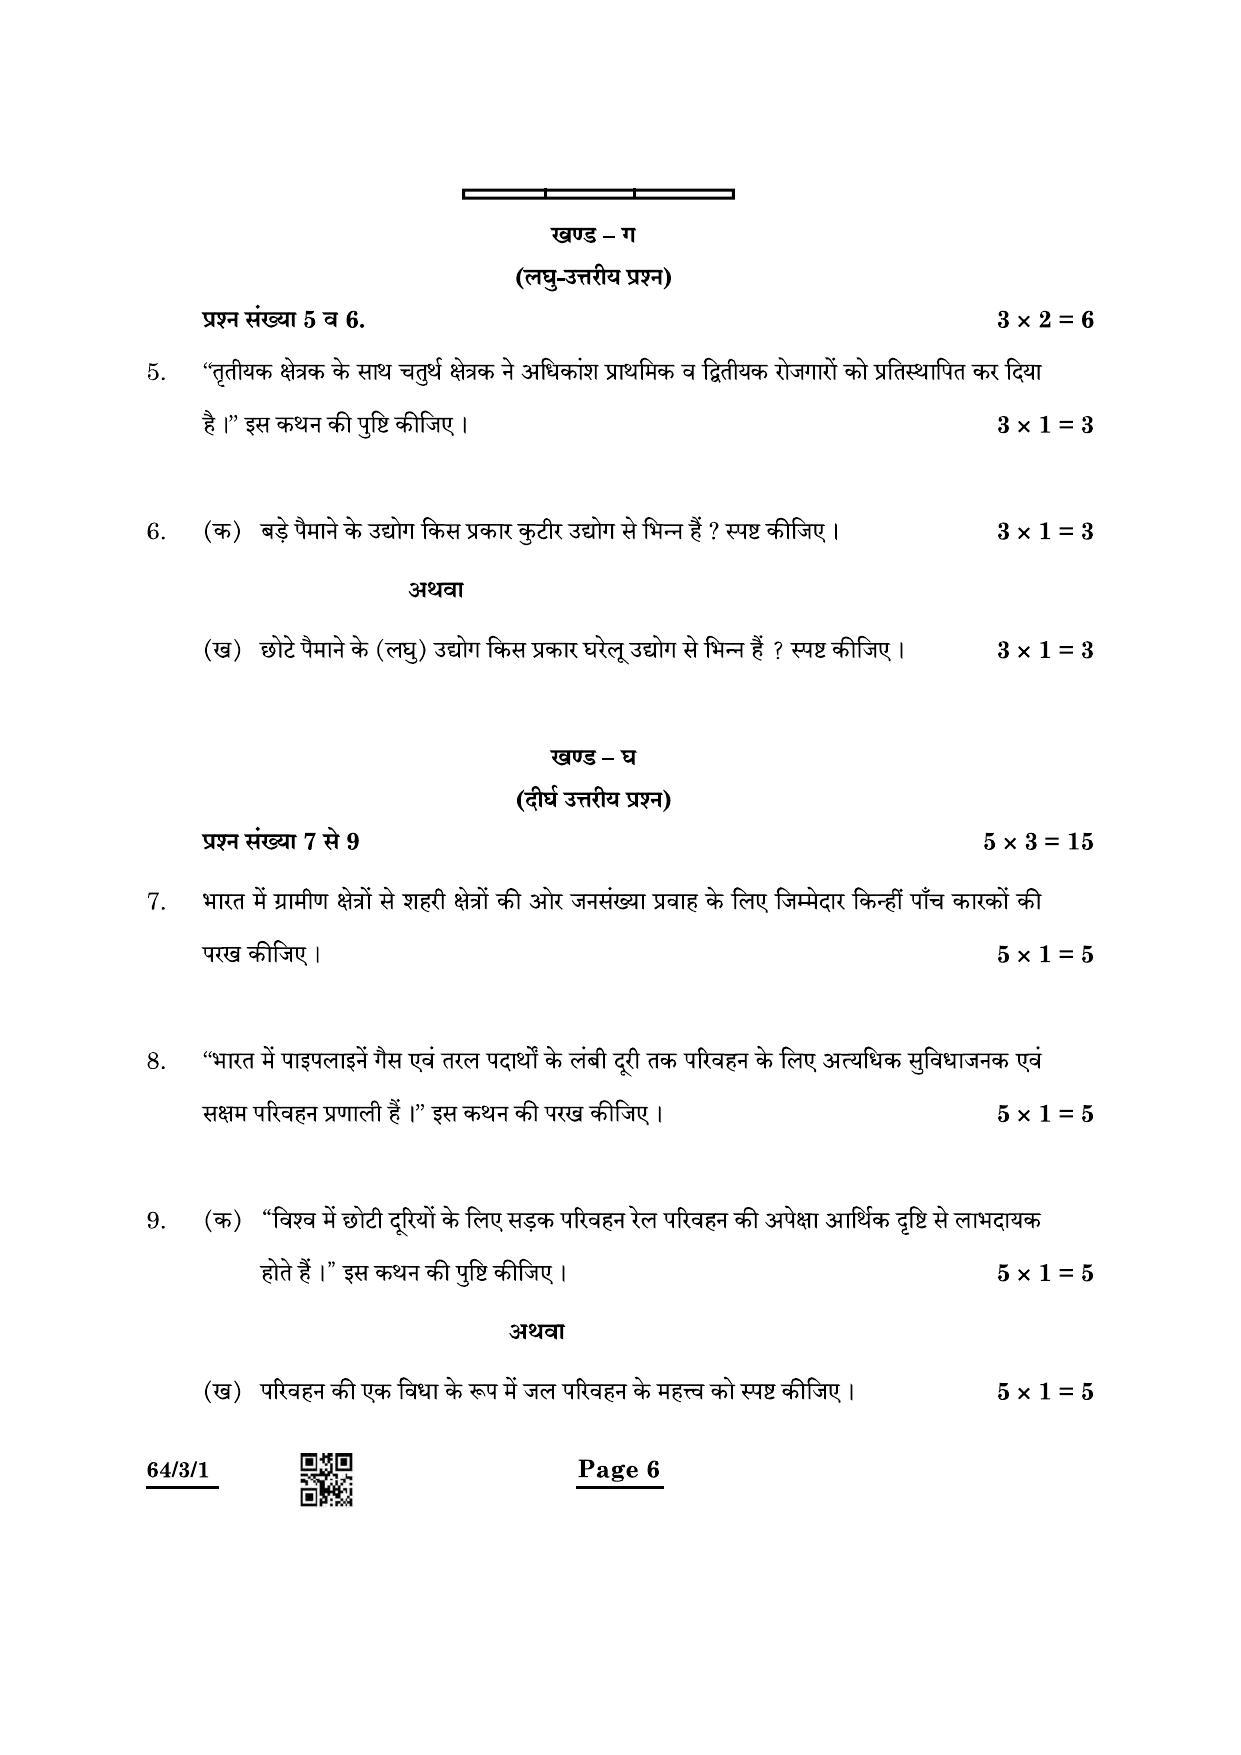 CBSE Class 12 64-3-1 Geography 2022 Question Paper - Page 6